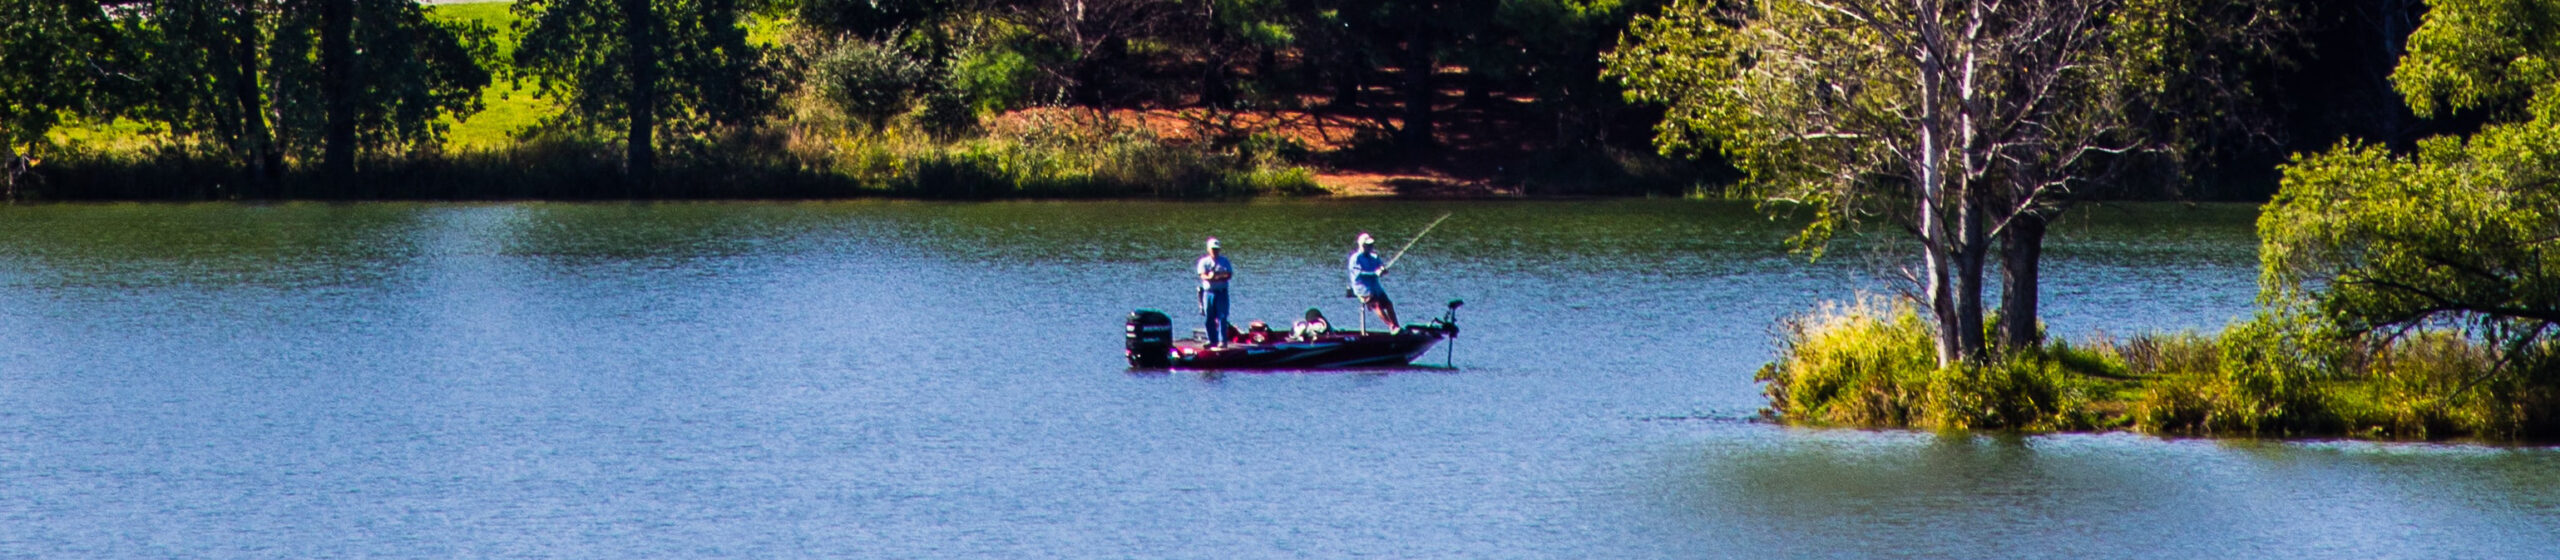 Two men out fishing on a small motor boat on a lake